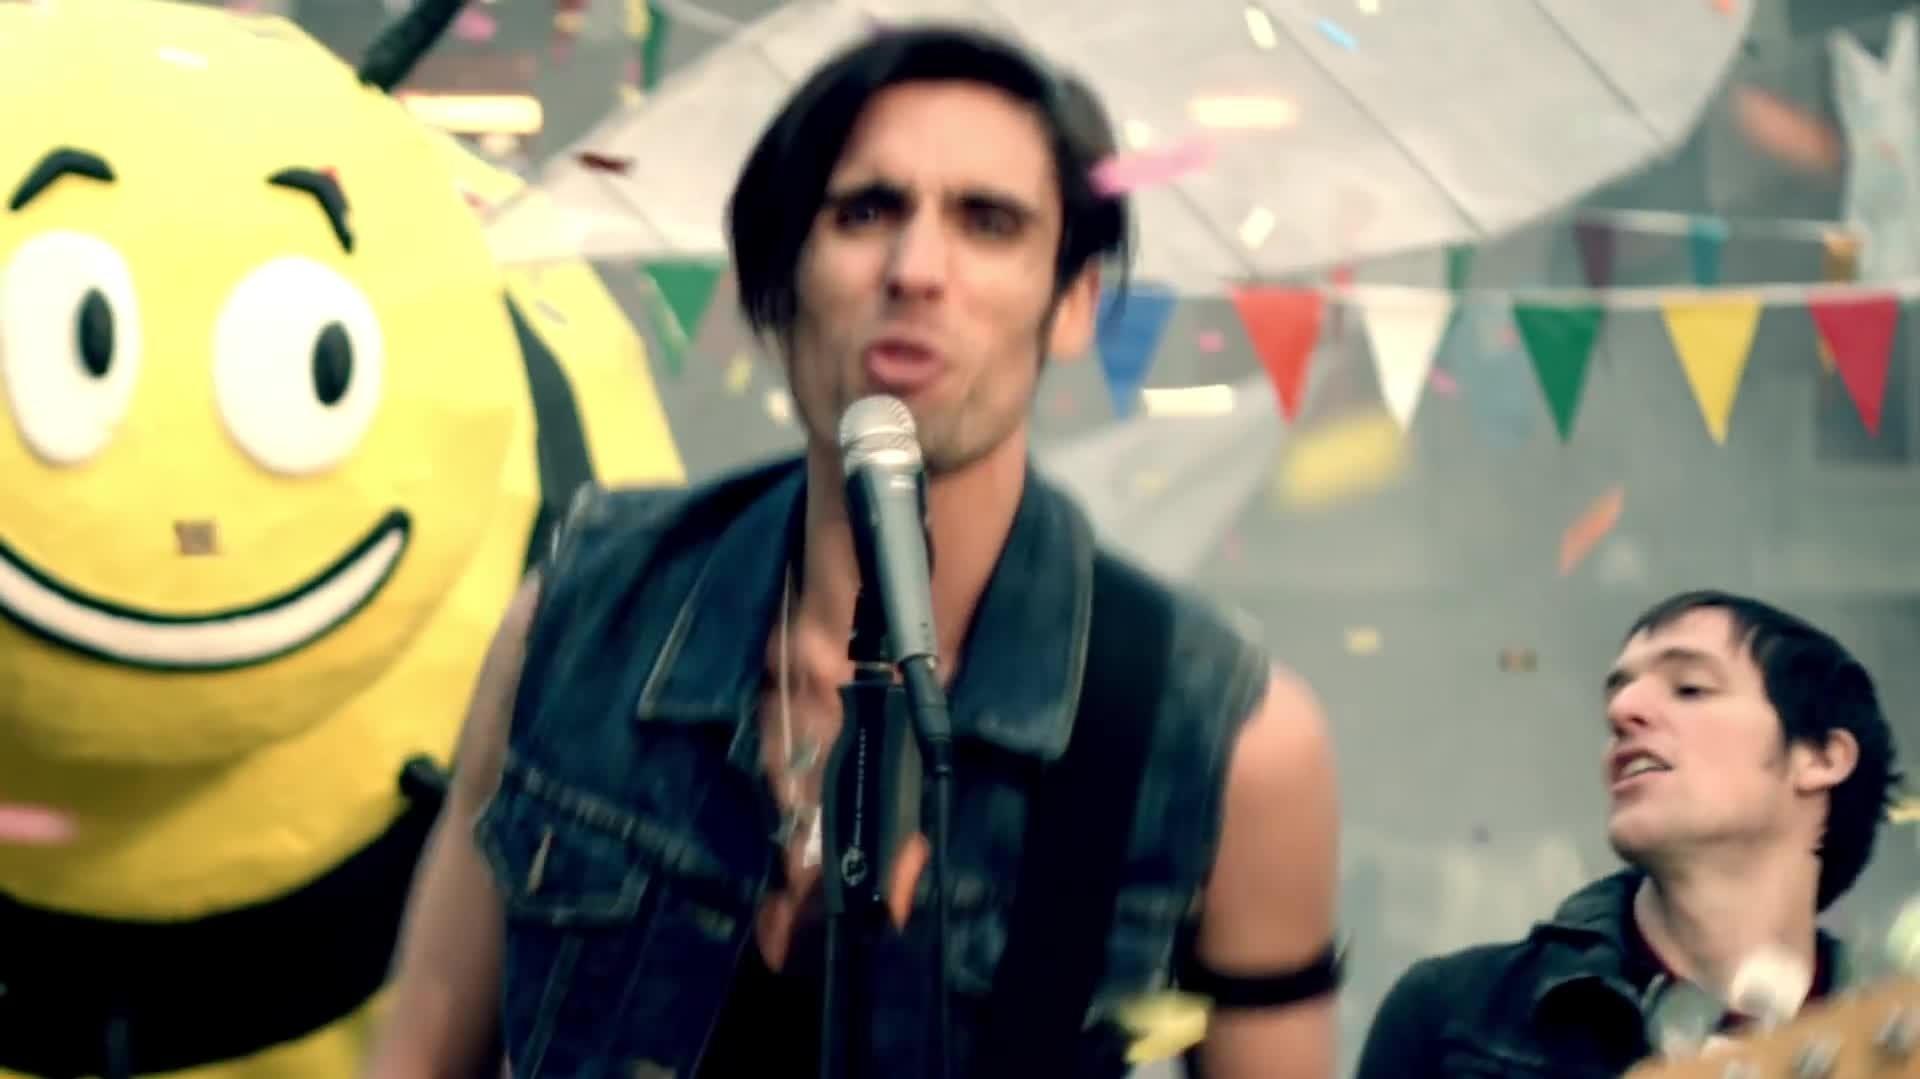 The All-American Rejects - Beekeeper's Daughter